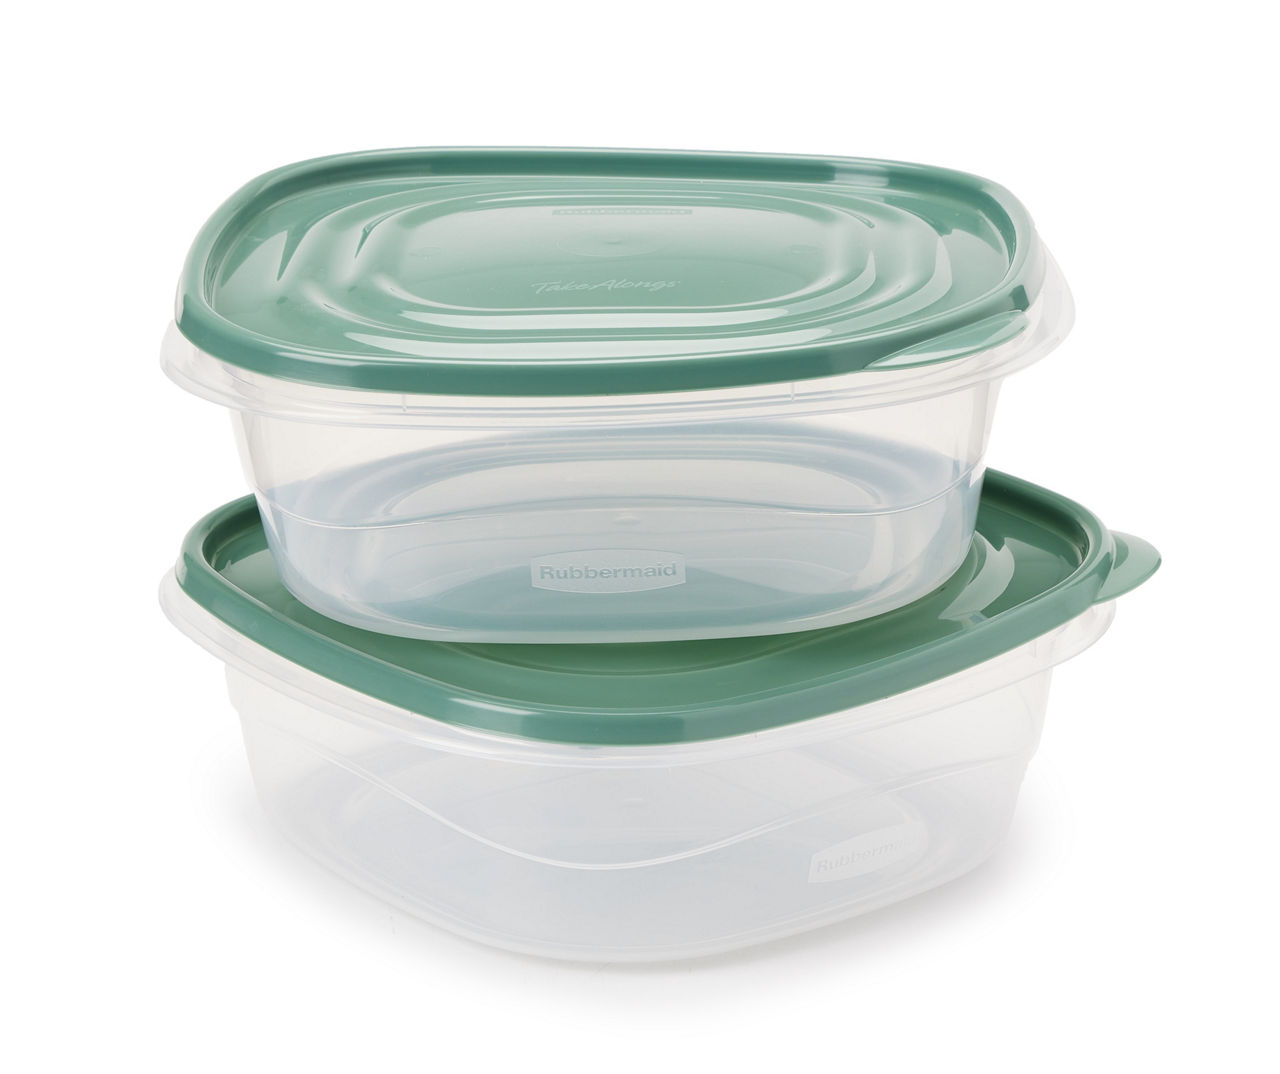 Rubbermaid Take Alongs 2.9 Cup Square Storage Container Set Blue Spruce (4  ct)